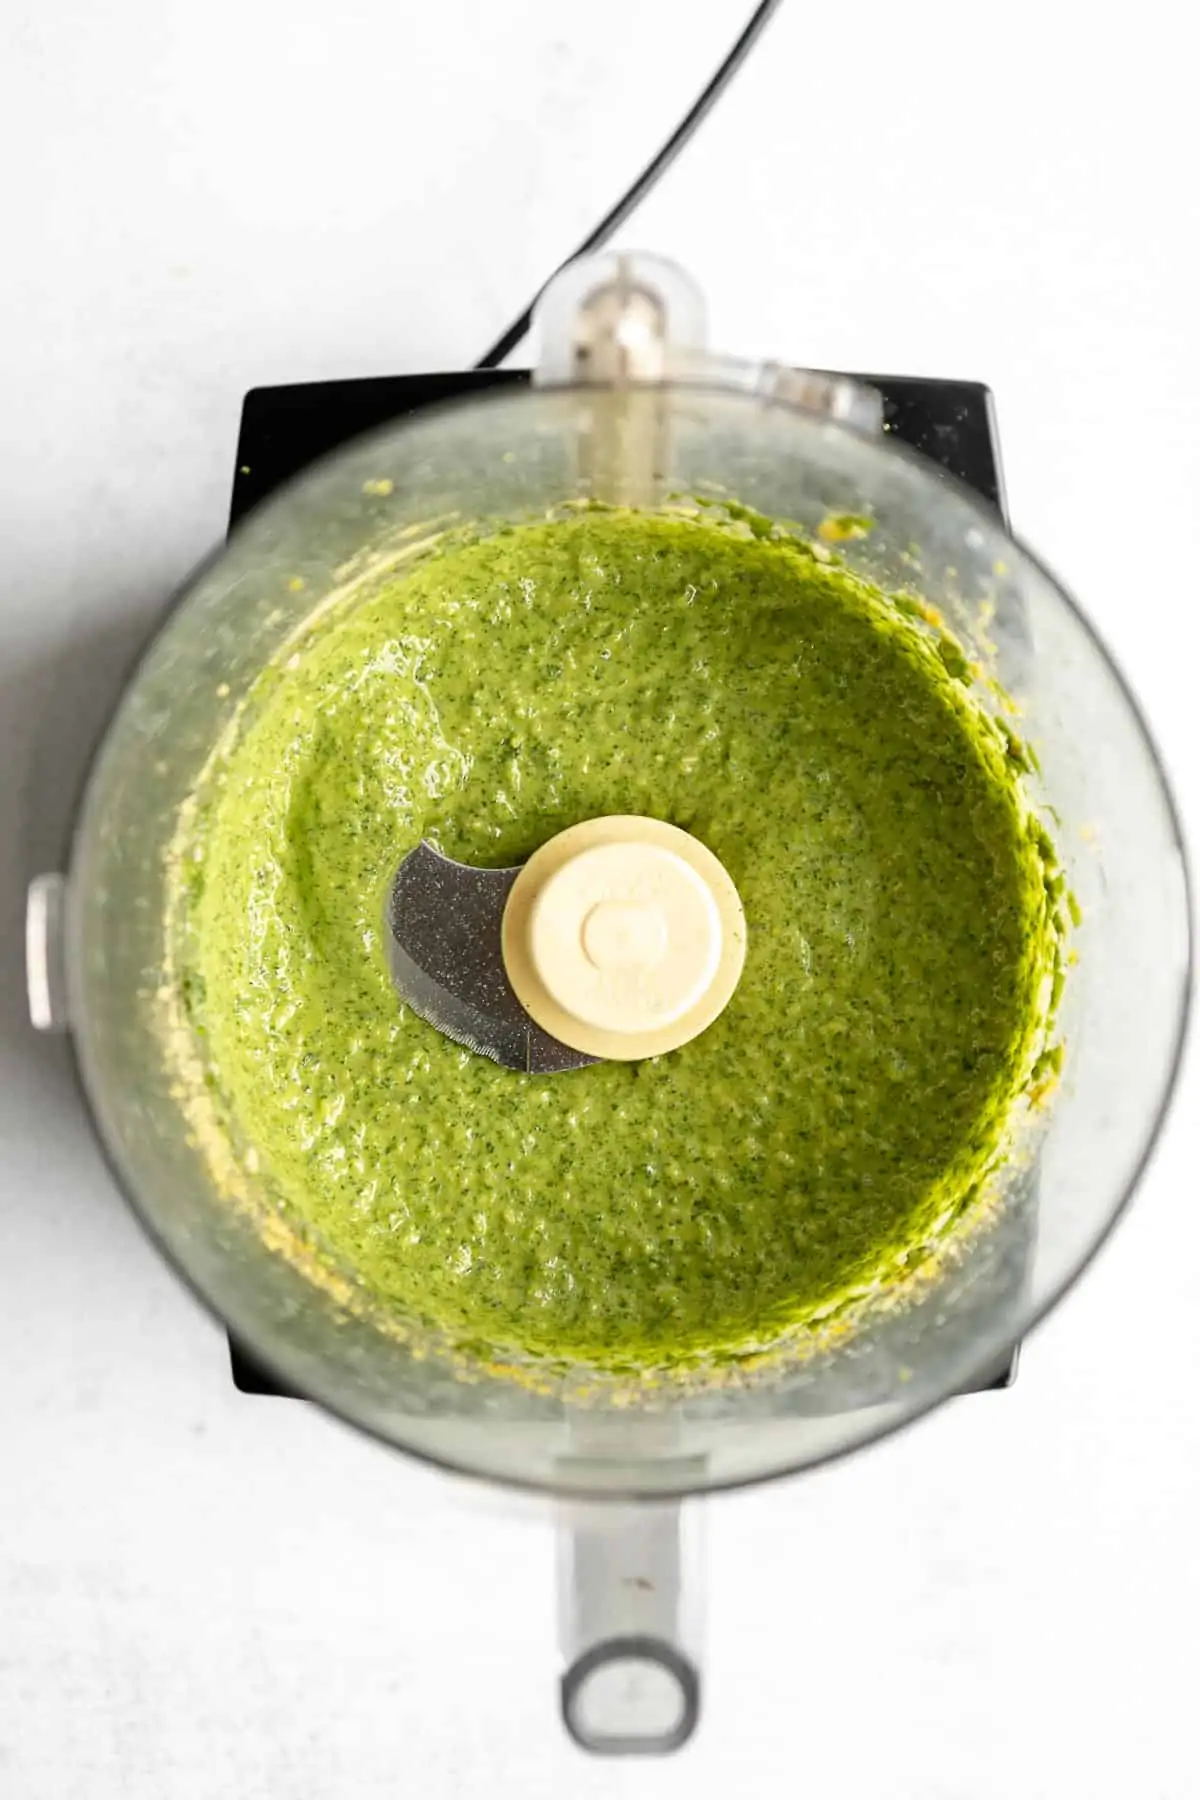 pesto sauce in the food processor after blending